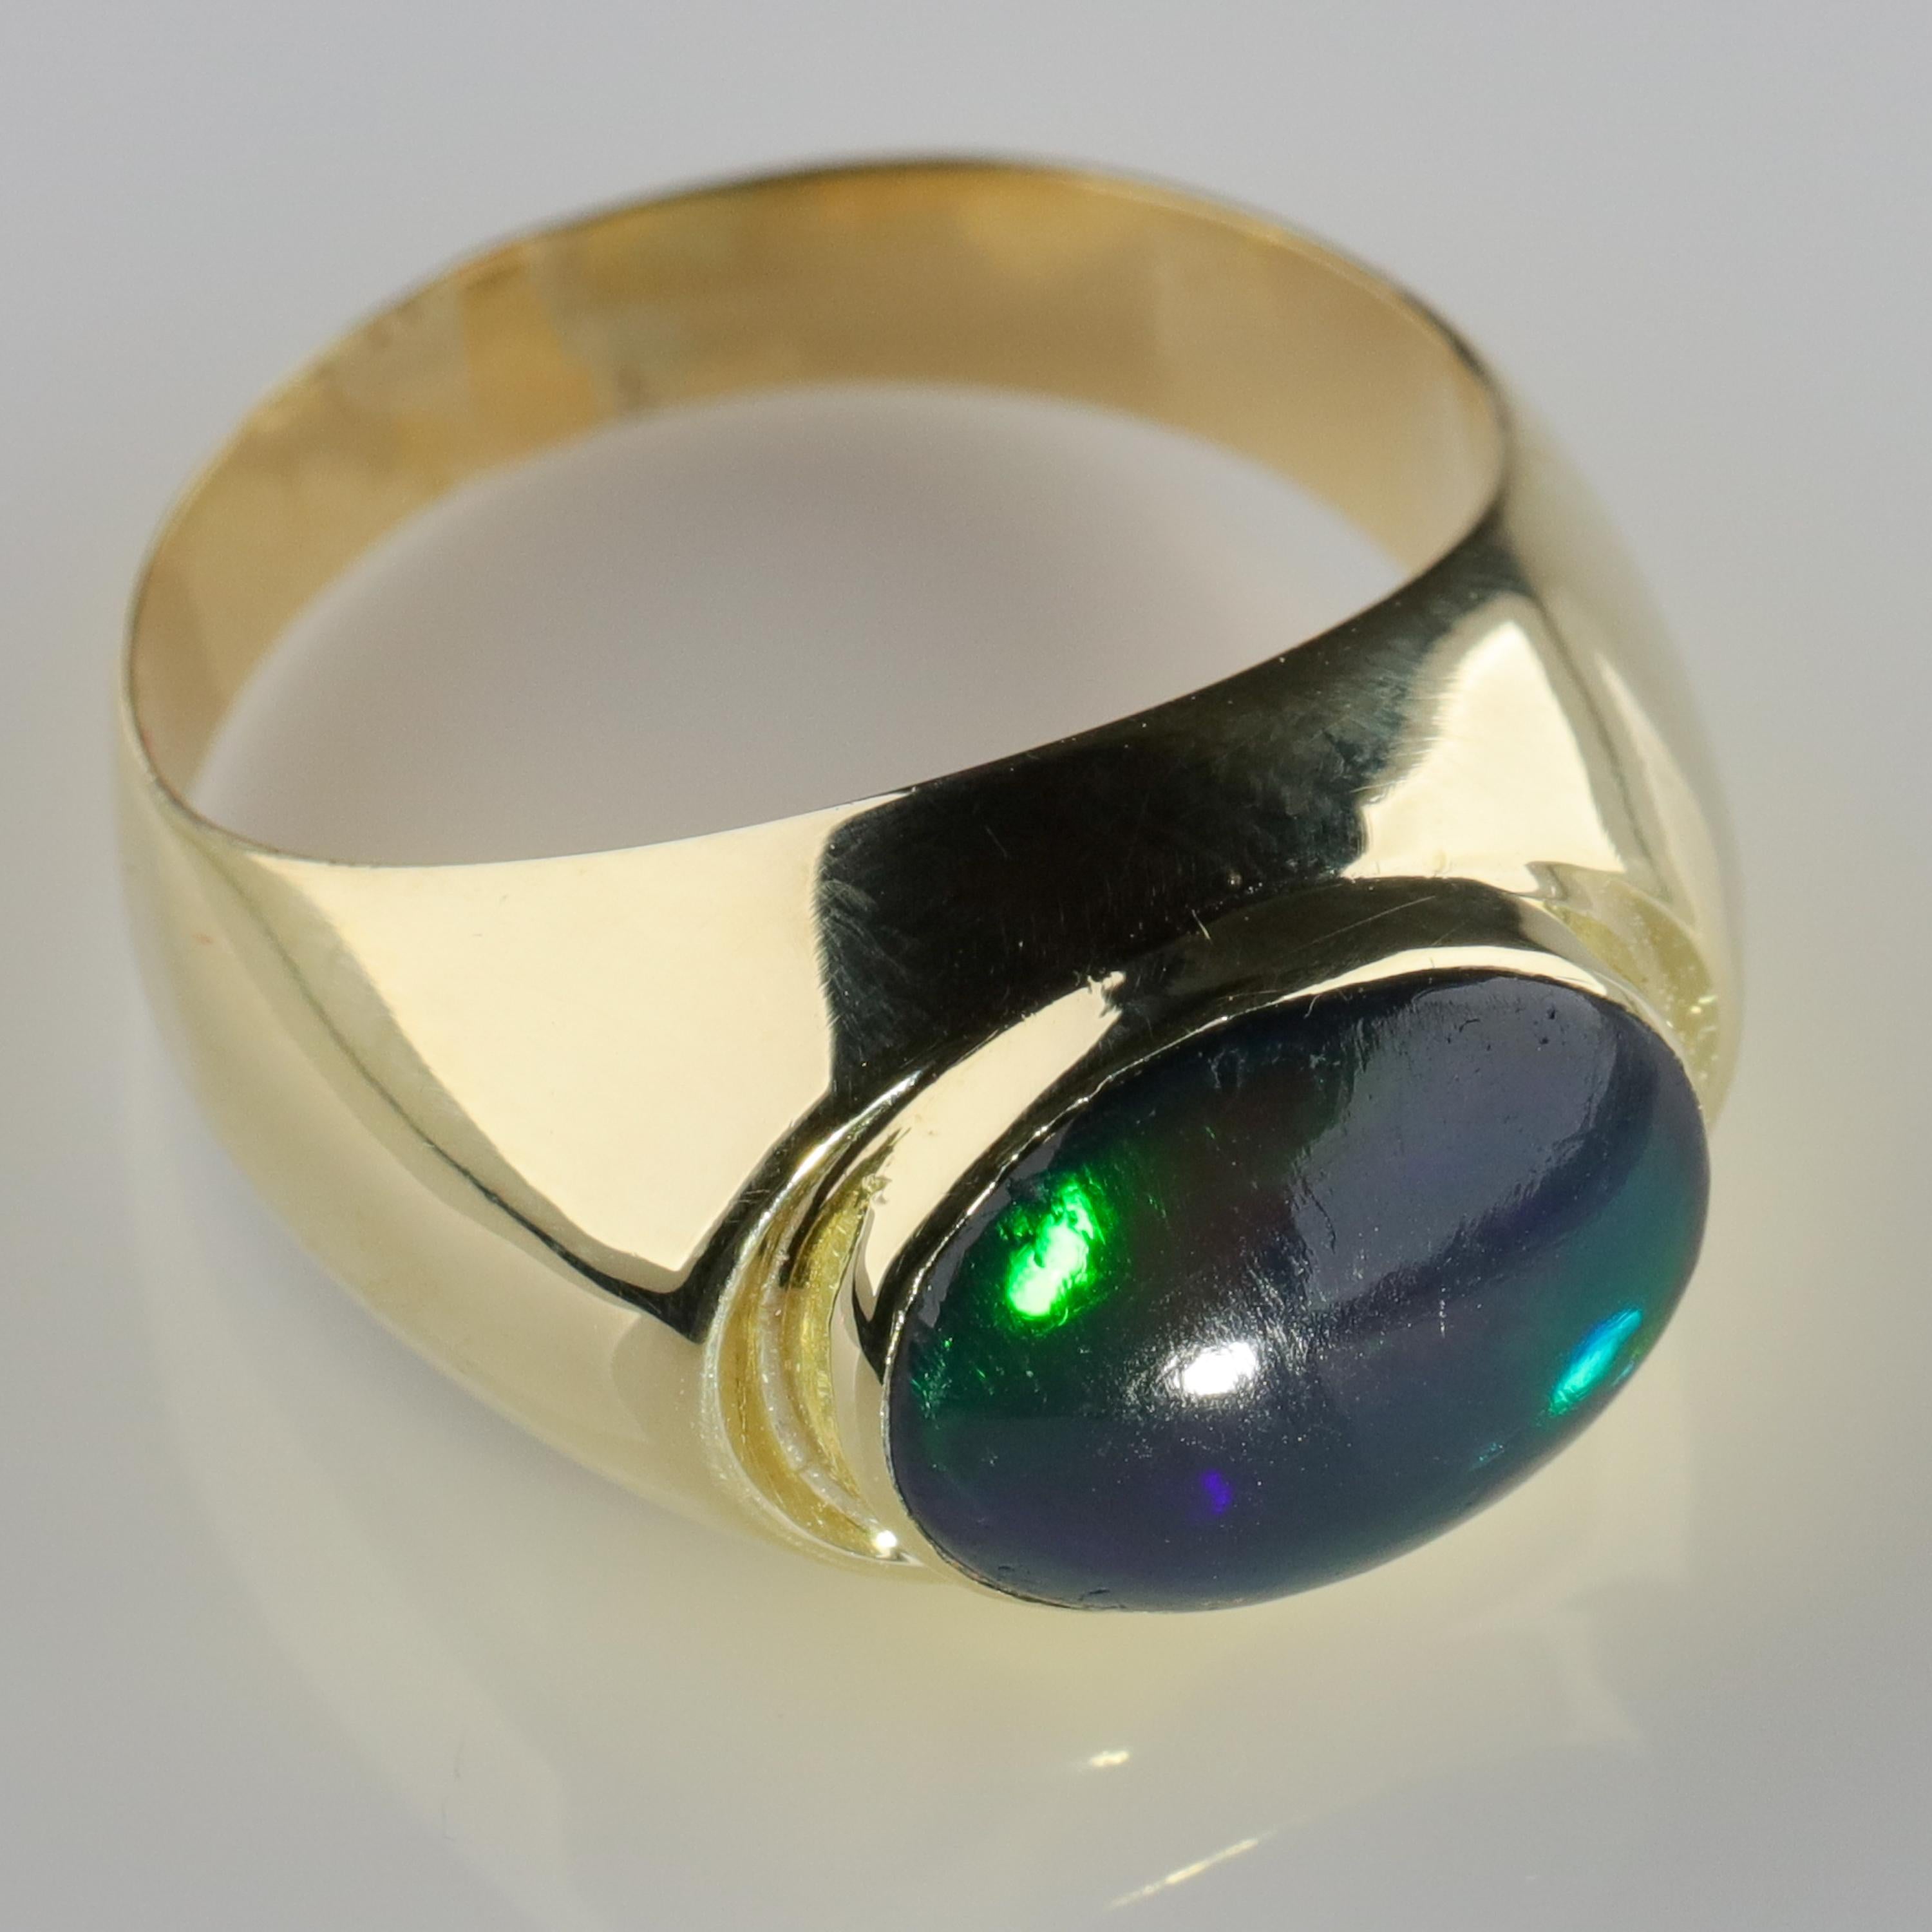 Black Opal Ring from Lightning Ridge is Understated Until It's Not 8